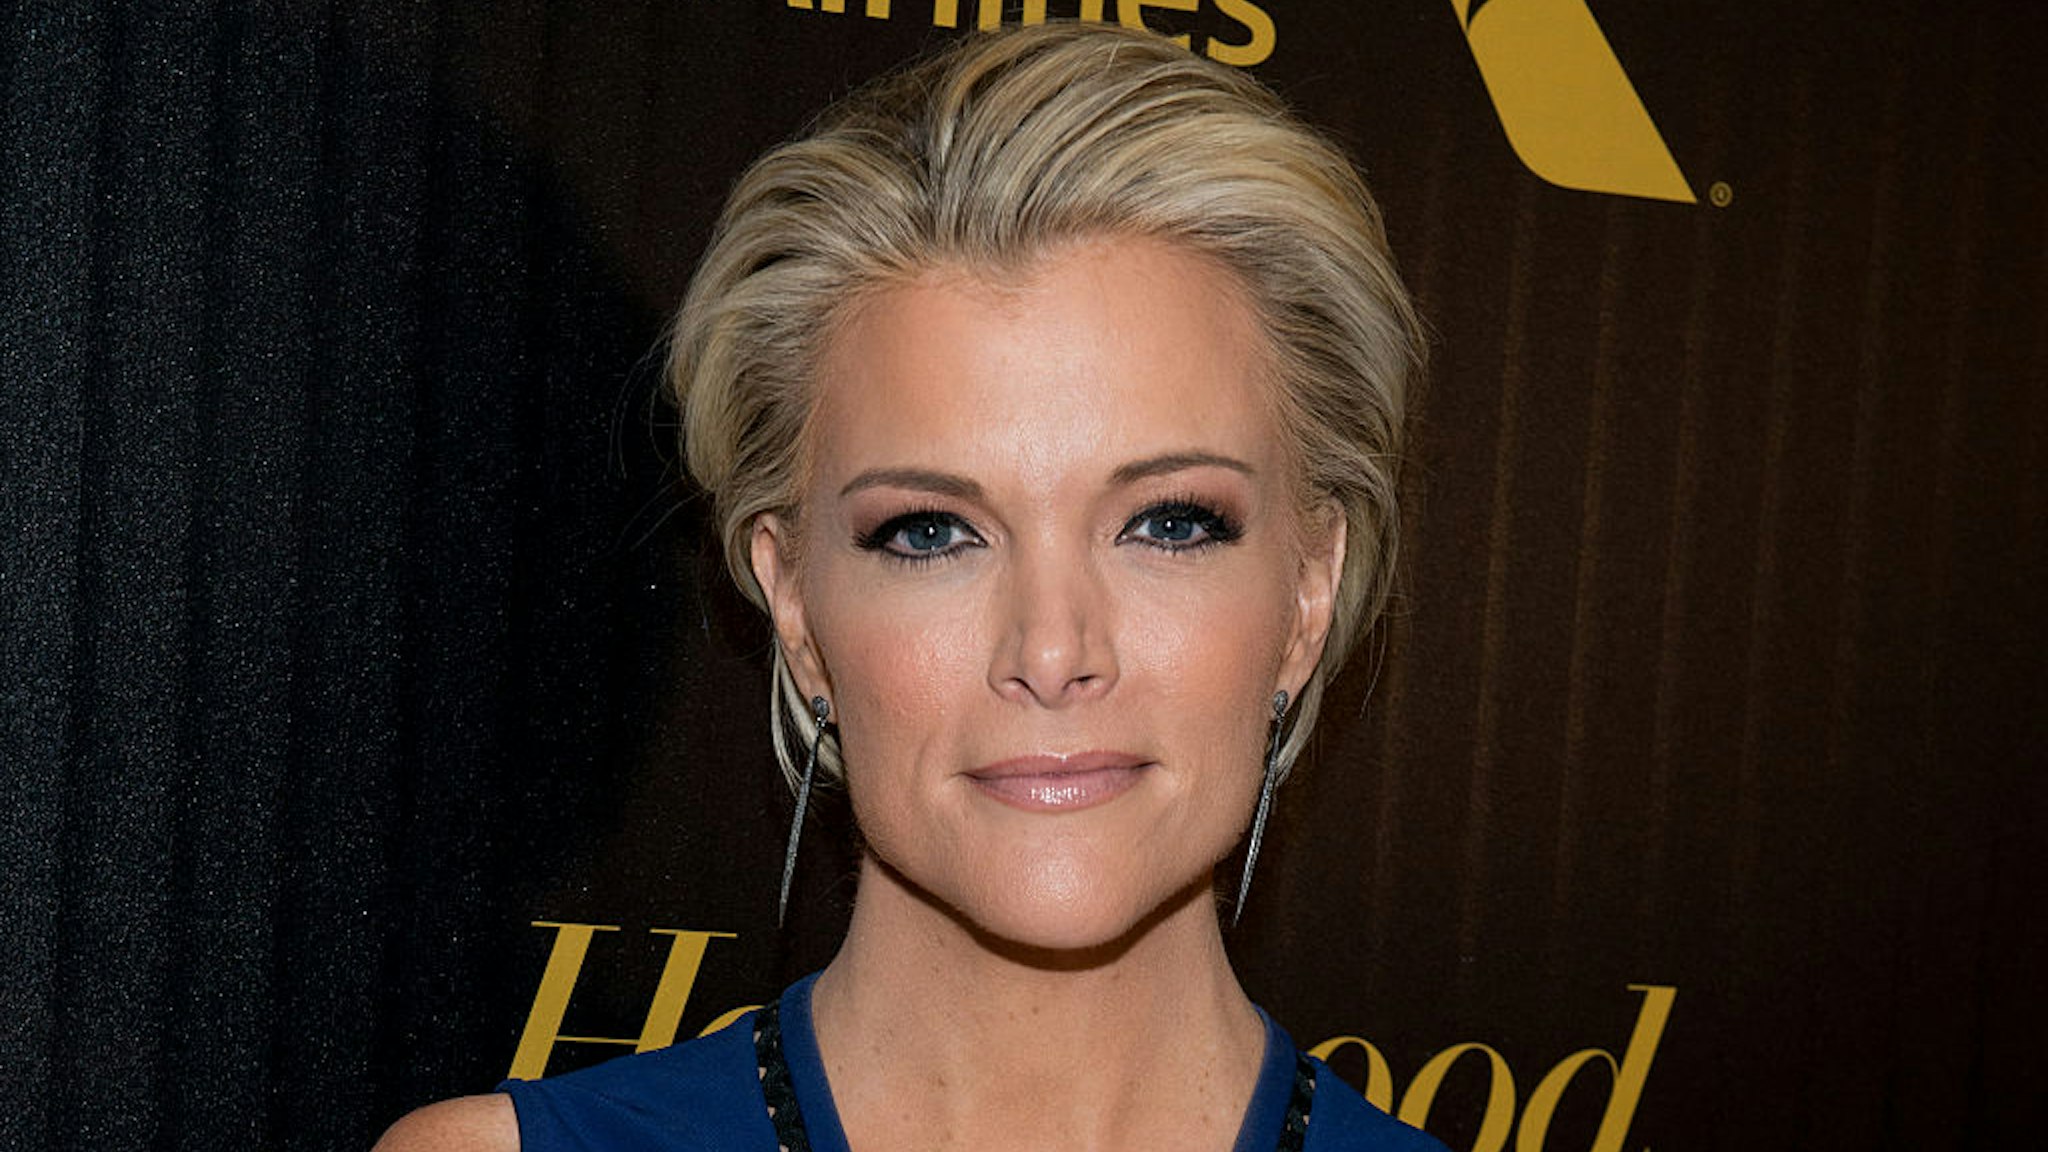 Journalist Megyn Kelly attends The Hollywood Reporter's 2016 35 Most Powerful People in Media at Four Seasons Restaurant on April 6, 2016 in New York City.